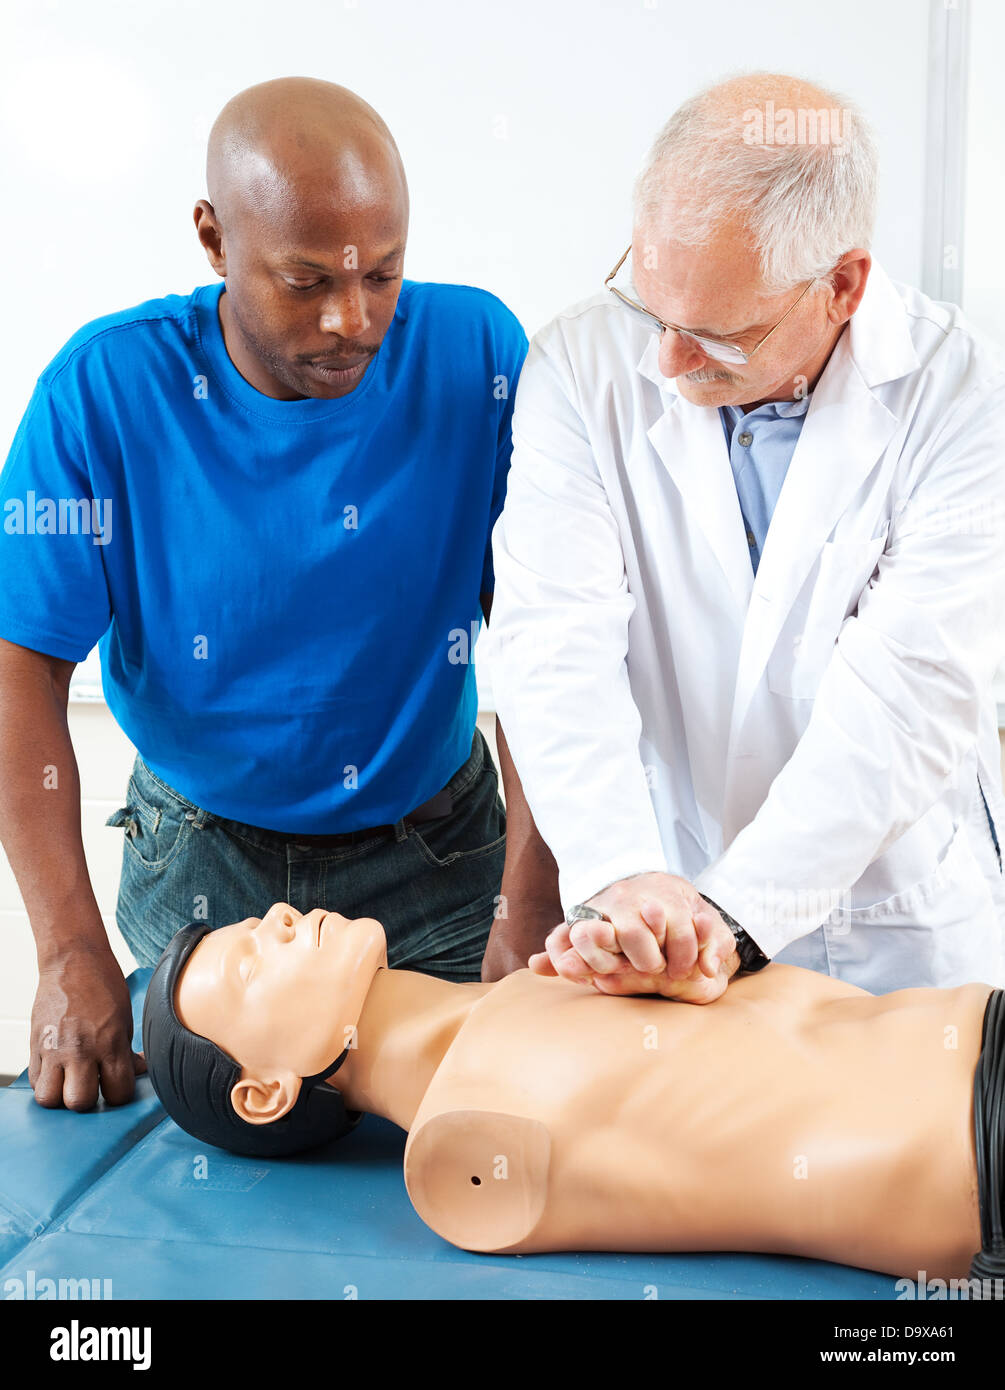 Mature doctor teaching an adult student how to perform CPR, using a dummy.  Stock Photo